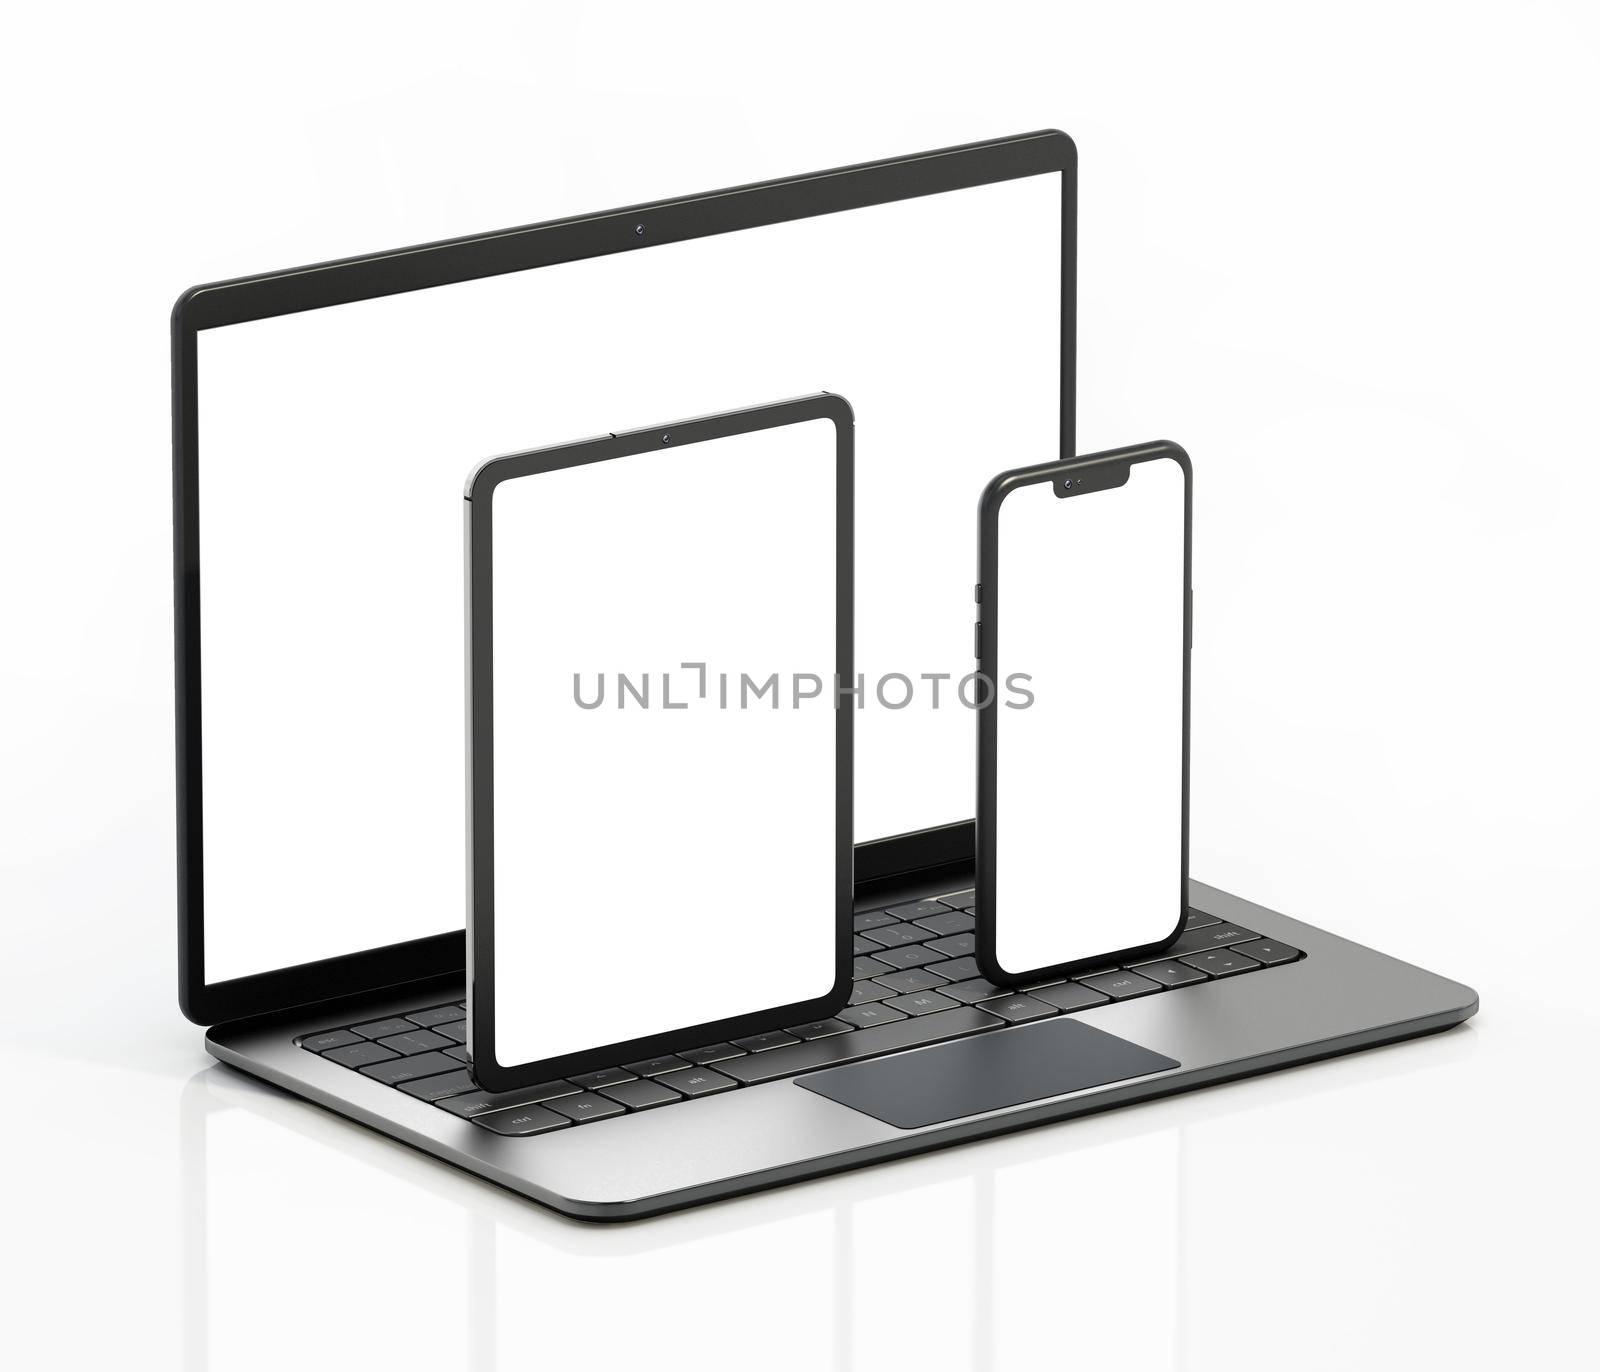 Laptop computer, smartphone and tablet computer isolated on white background. 3D illustration by Simsek